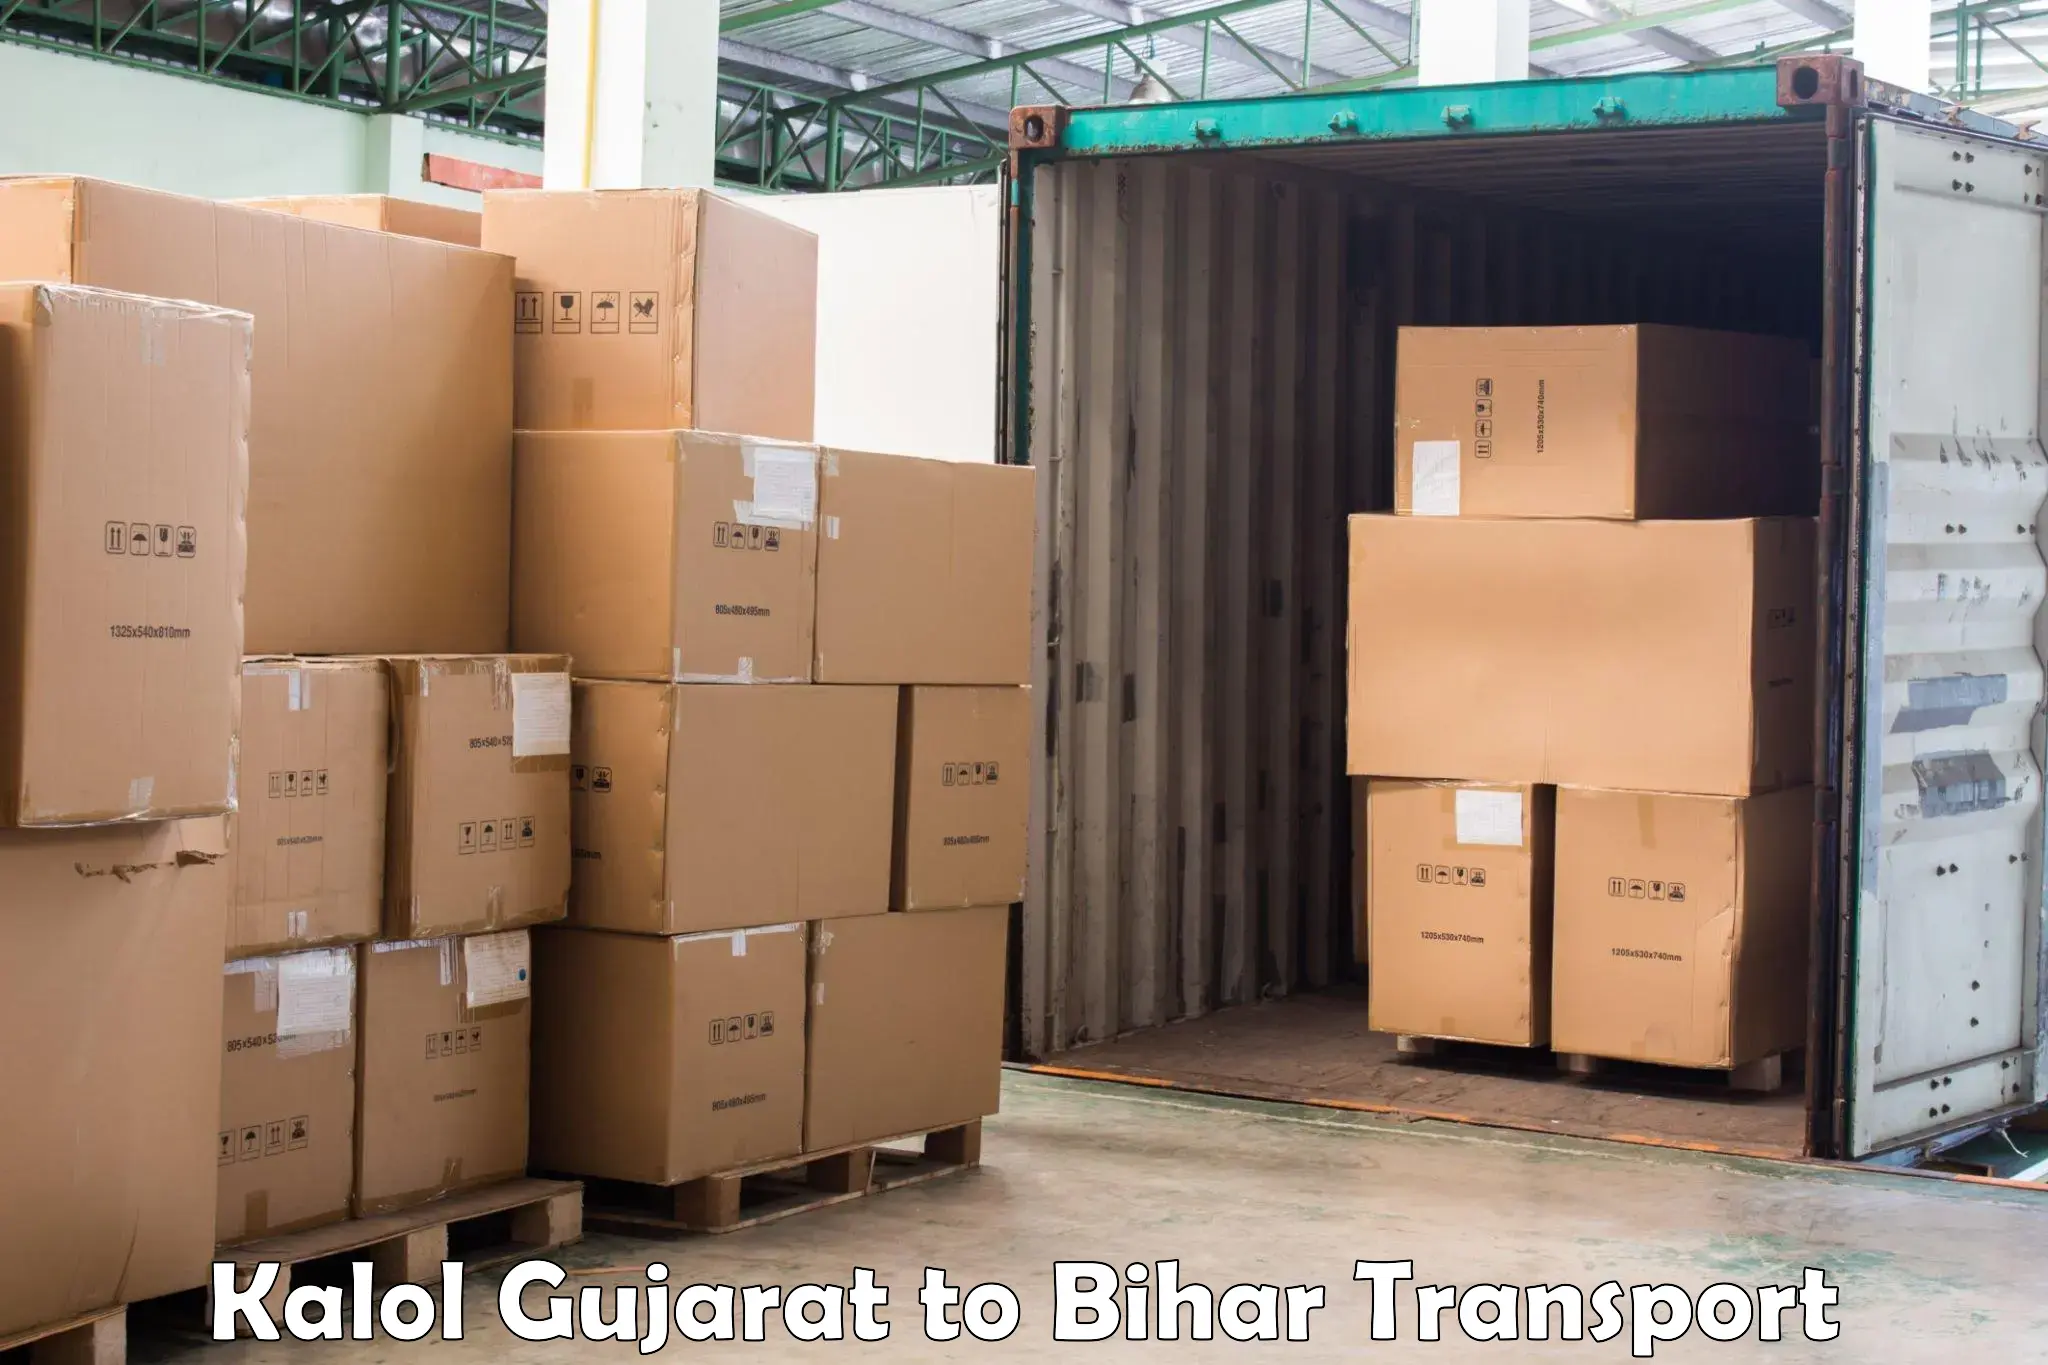 Transport bike from one state to another Kalol Gujarat to Hazrat Jandaha